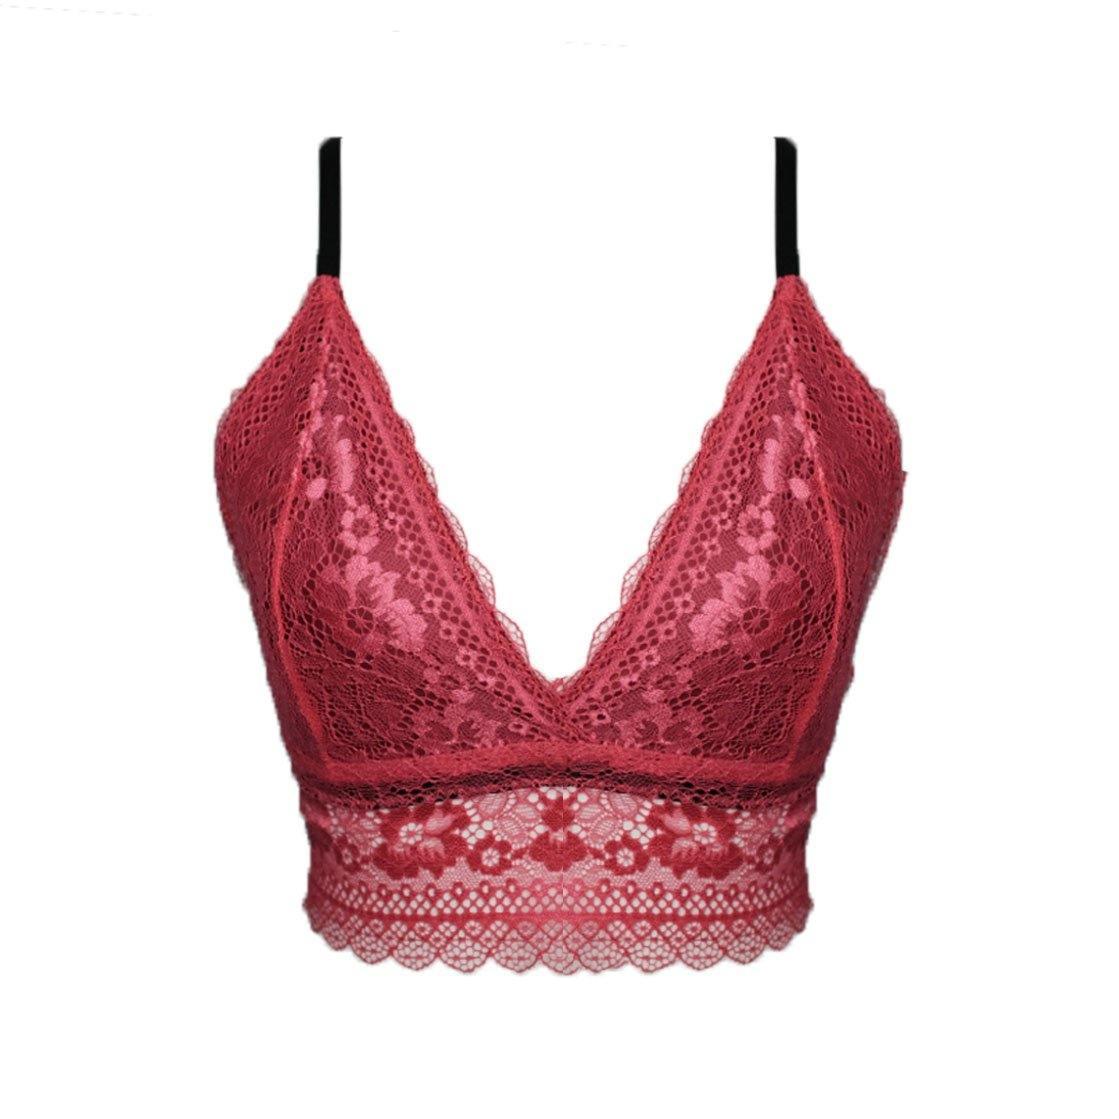 the lady luck bralette - Our Bralette Club